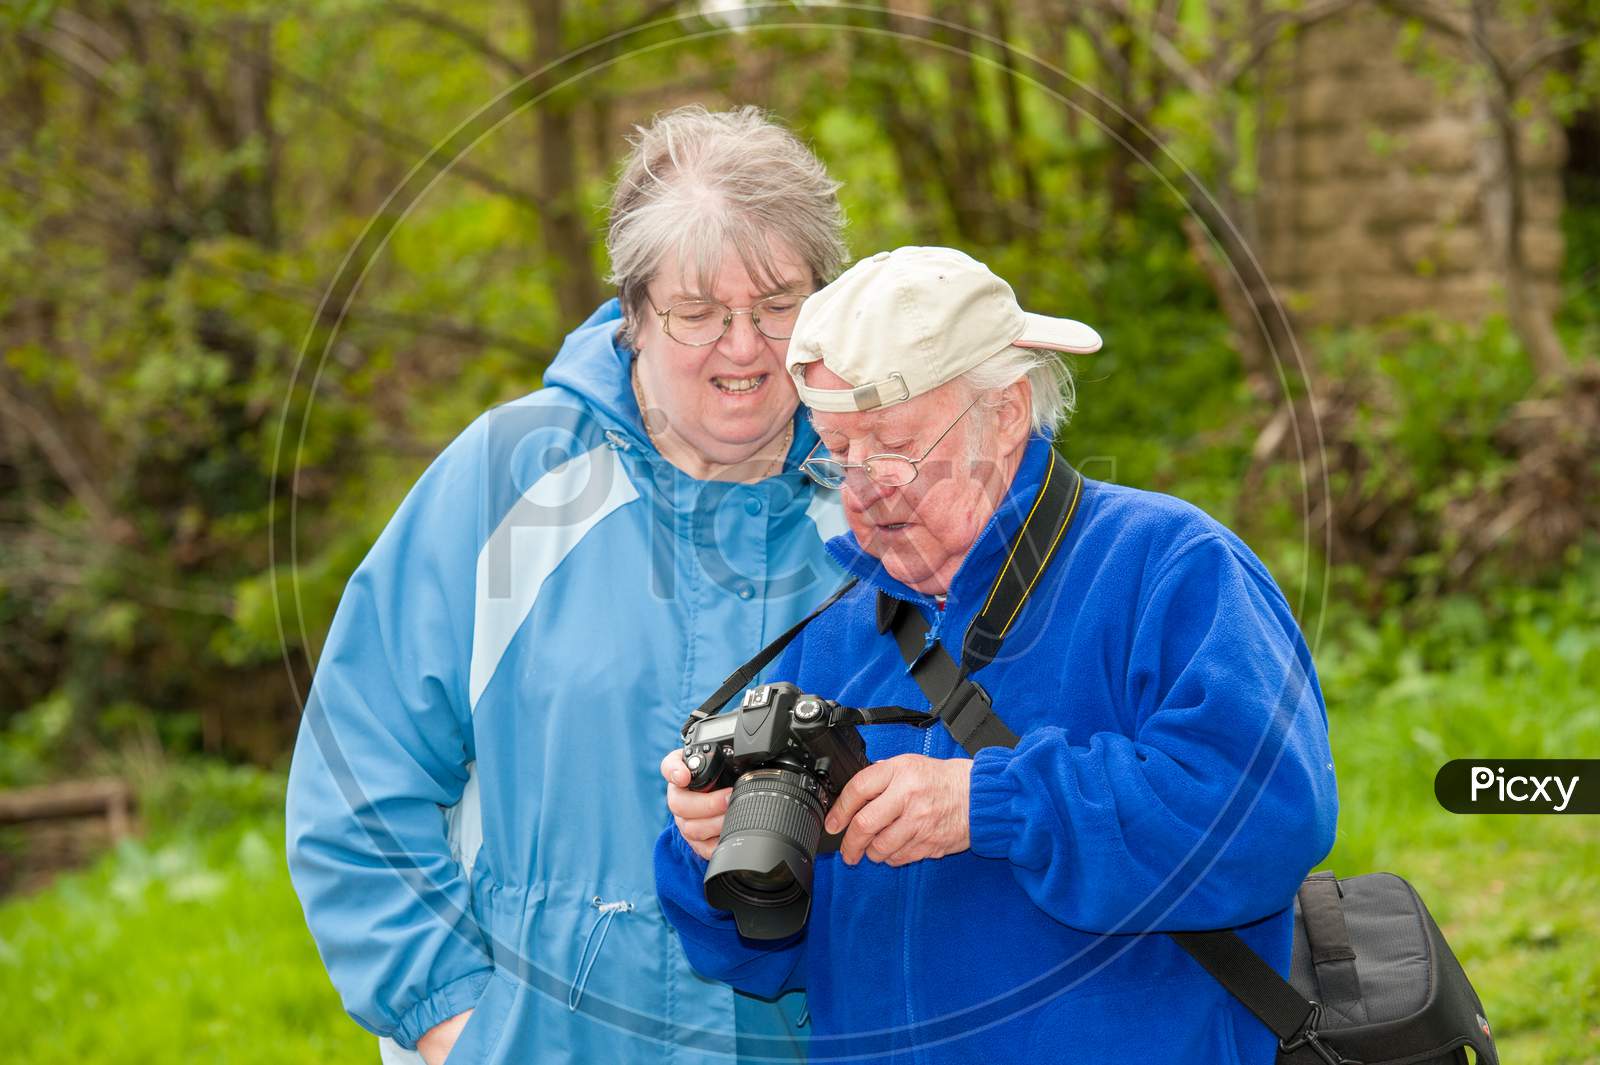 An Elderly Couple Review Photographs On The Back Of A Dslr Camera